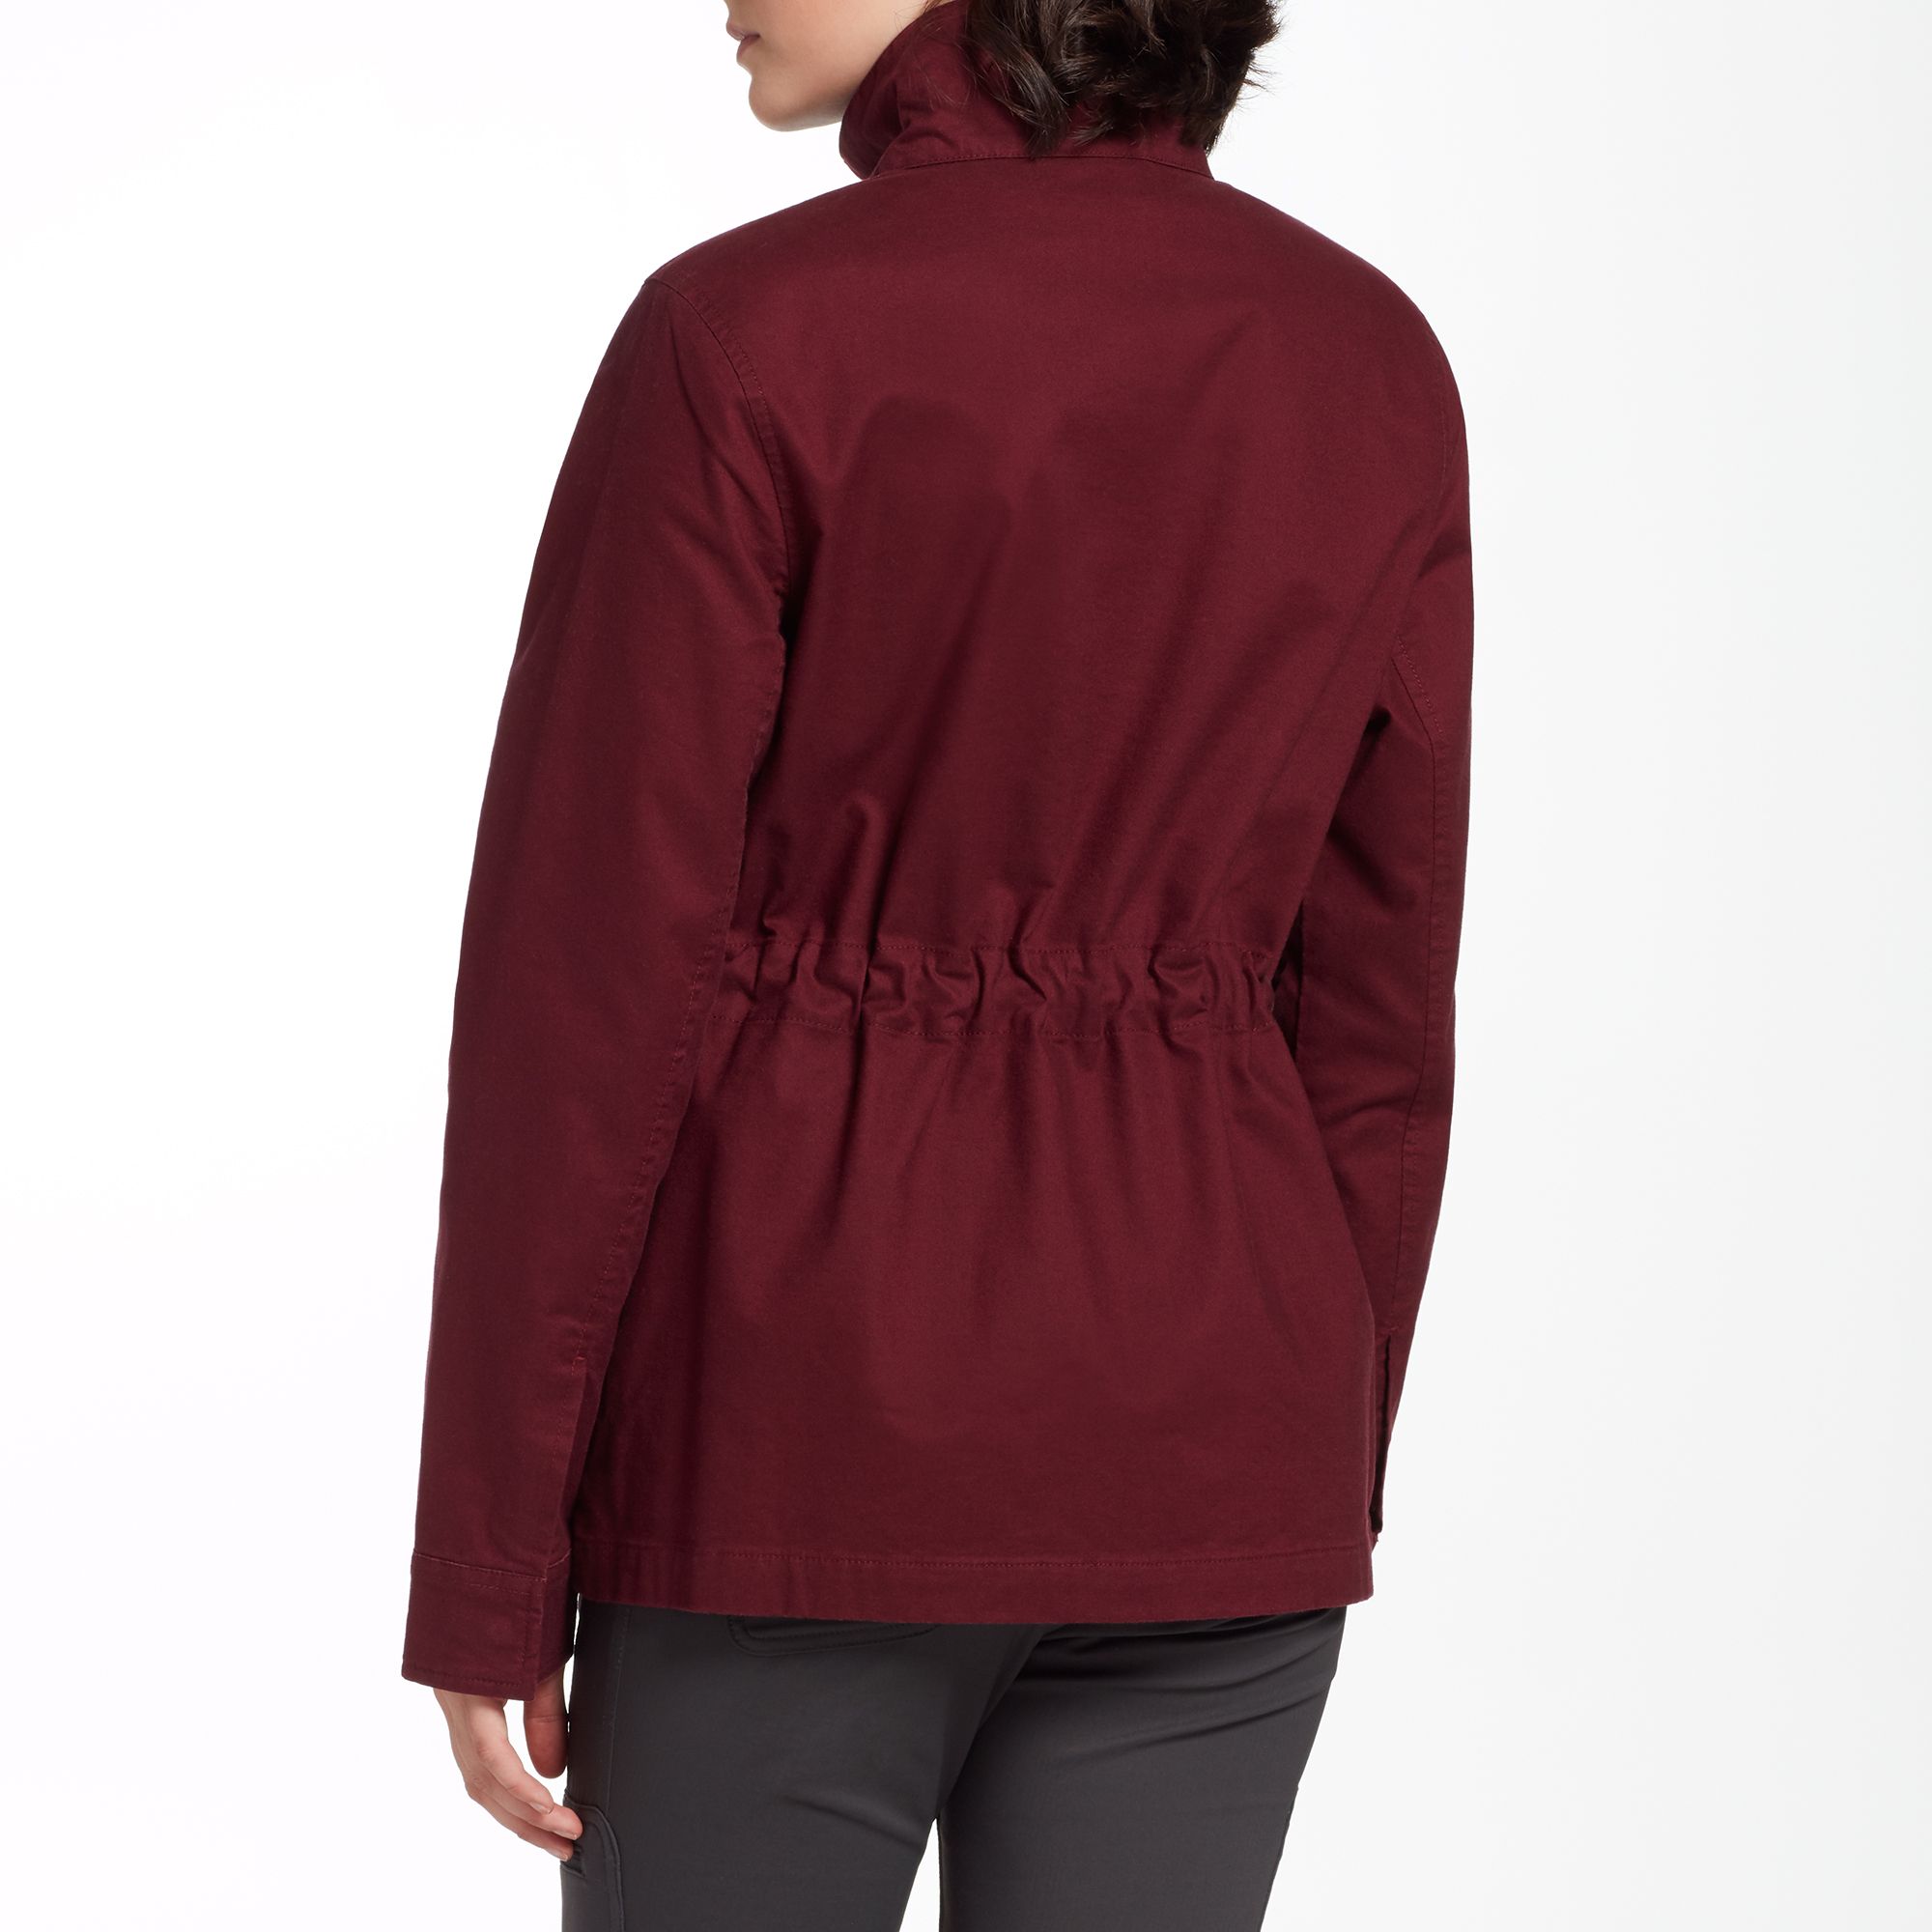 north face women's utility jacket